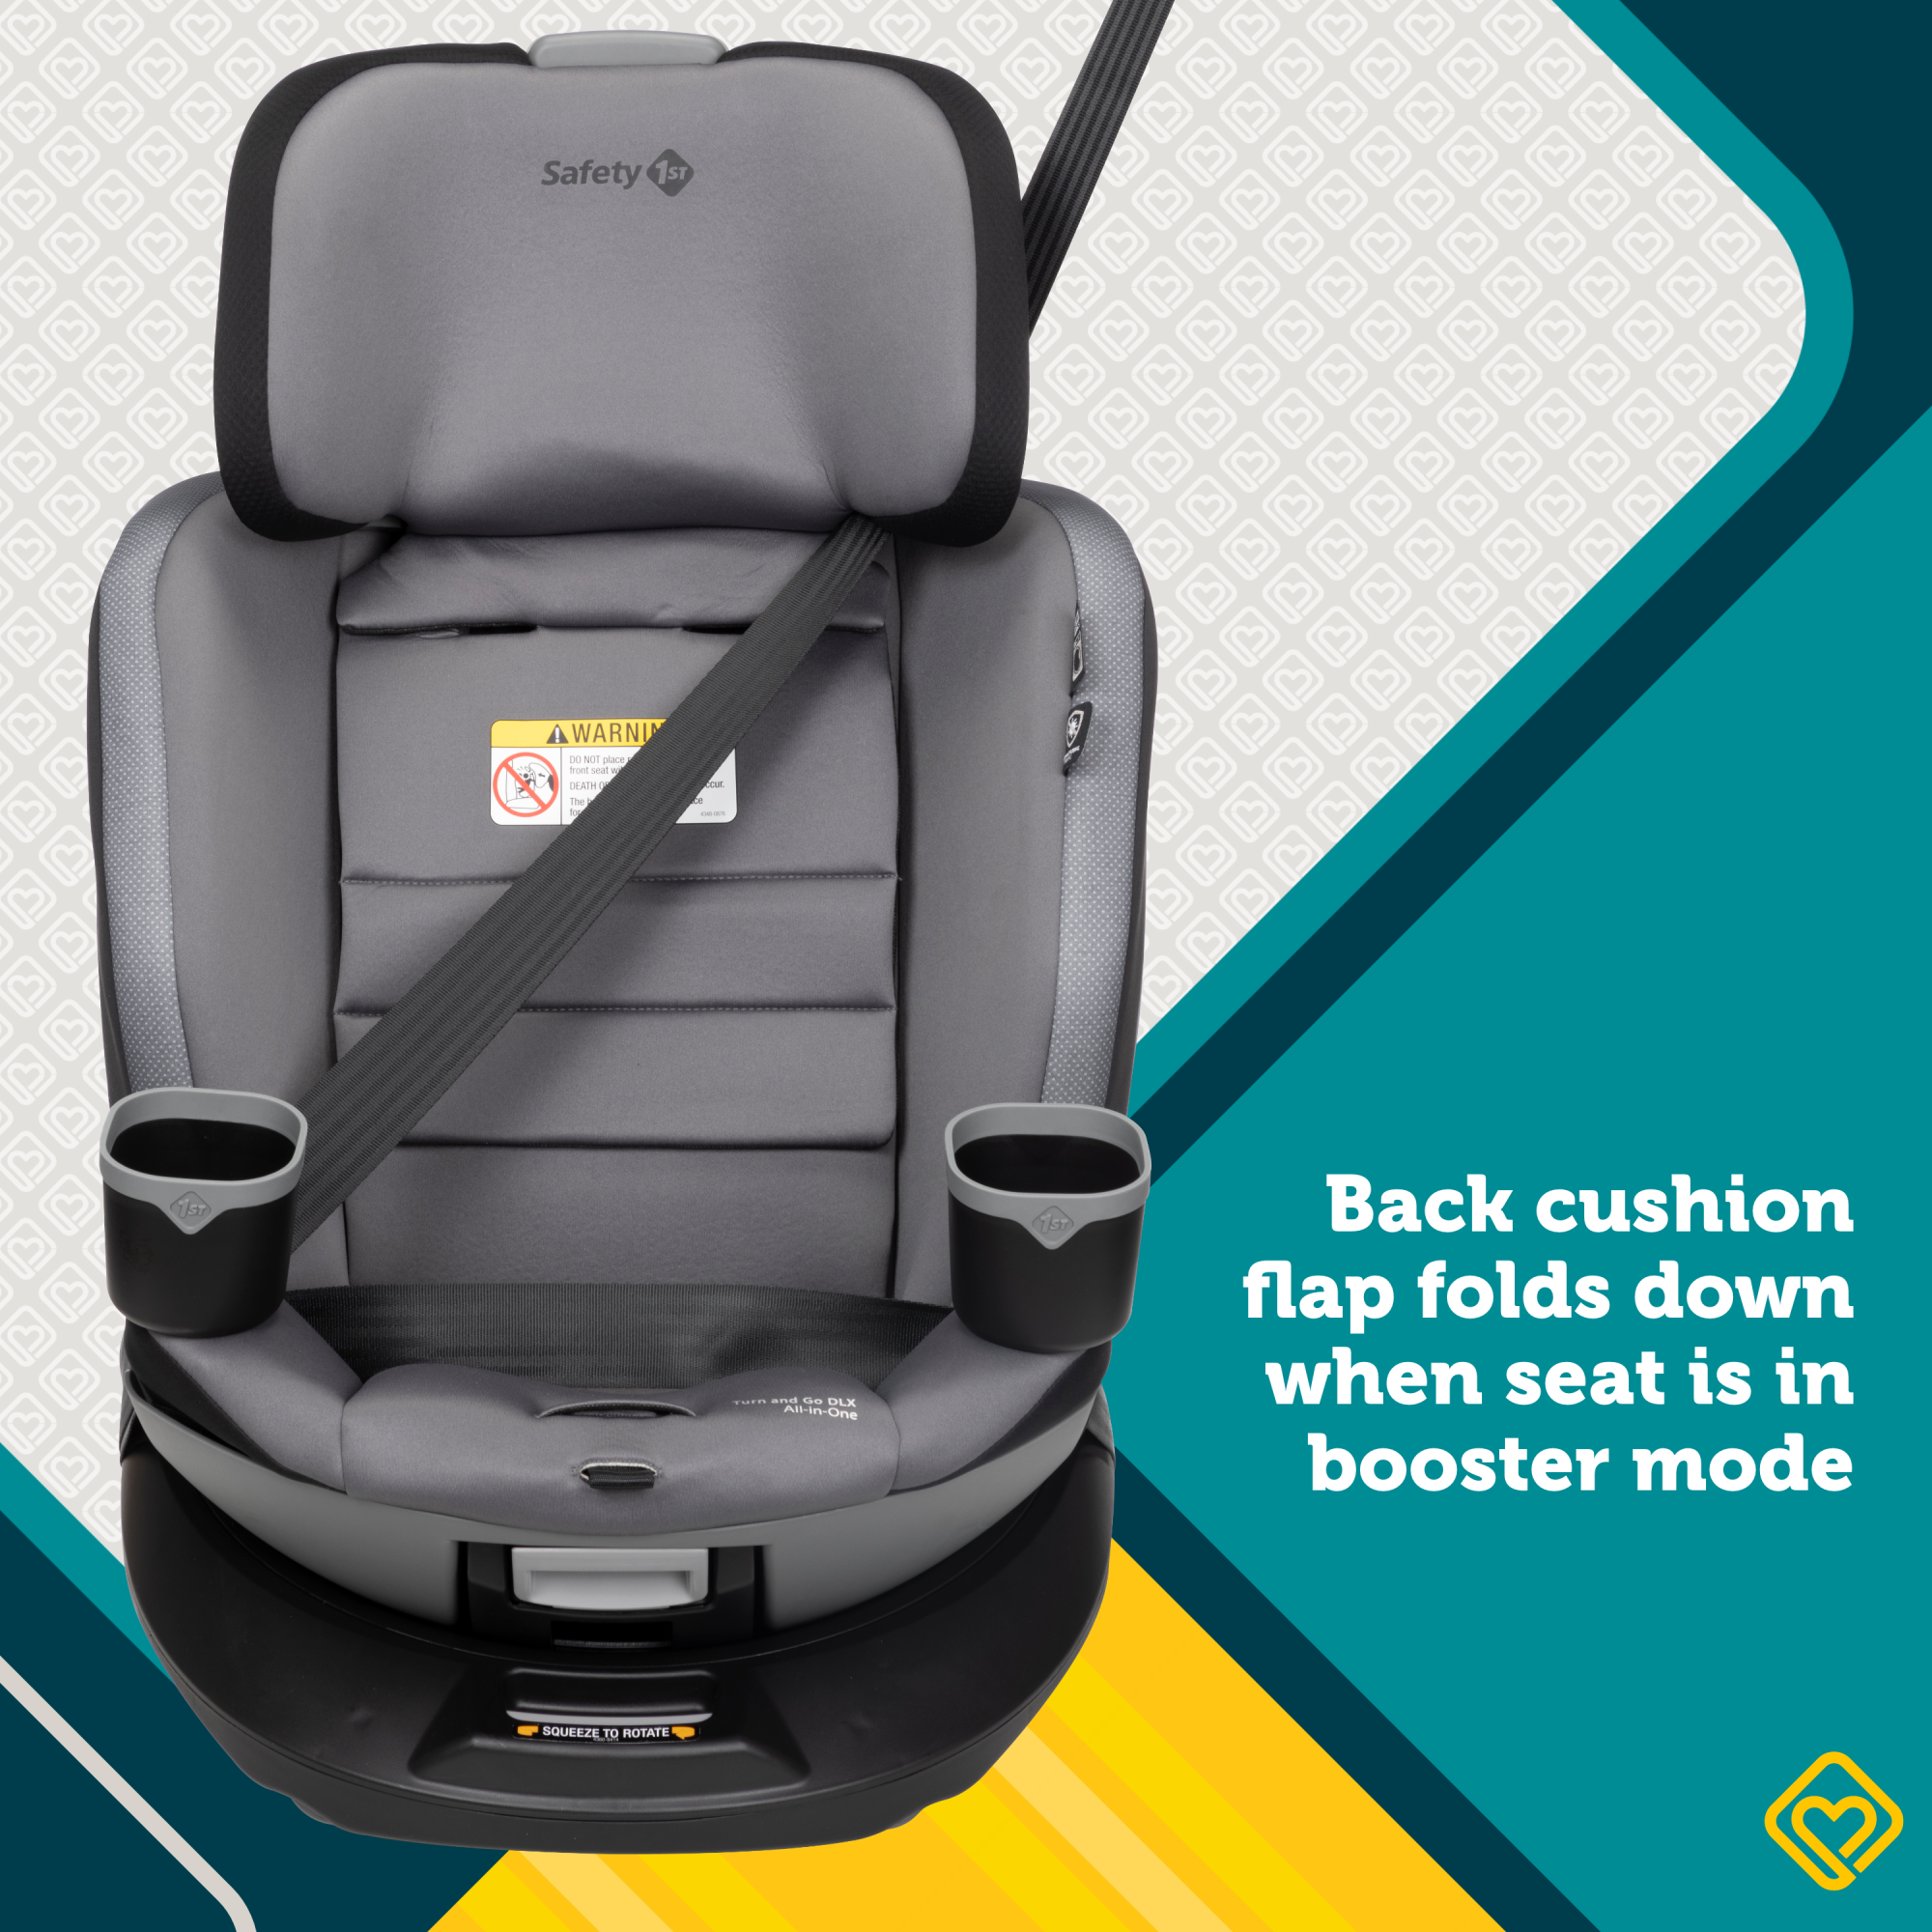 Turn and Go 360 DLX Rotating All-in-One Convertible Car Seat - back cushion flap folds down when seat is in booster mode